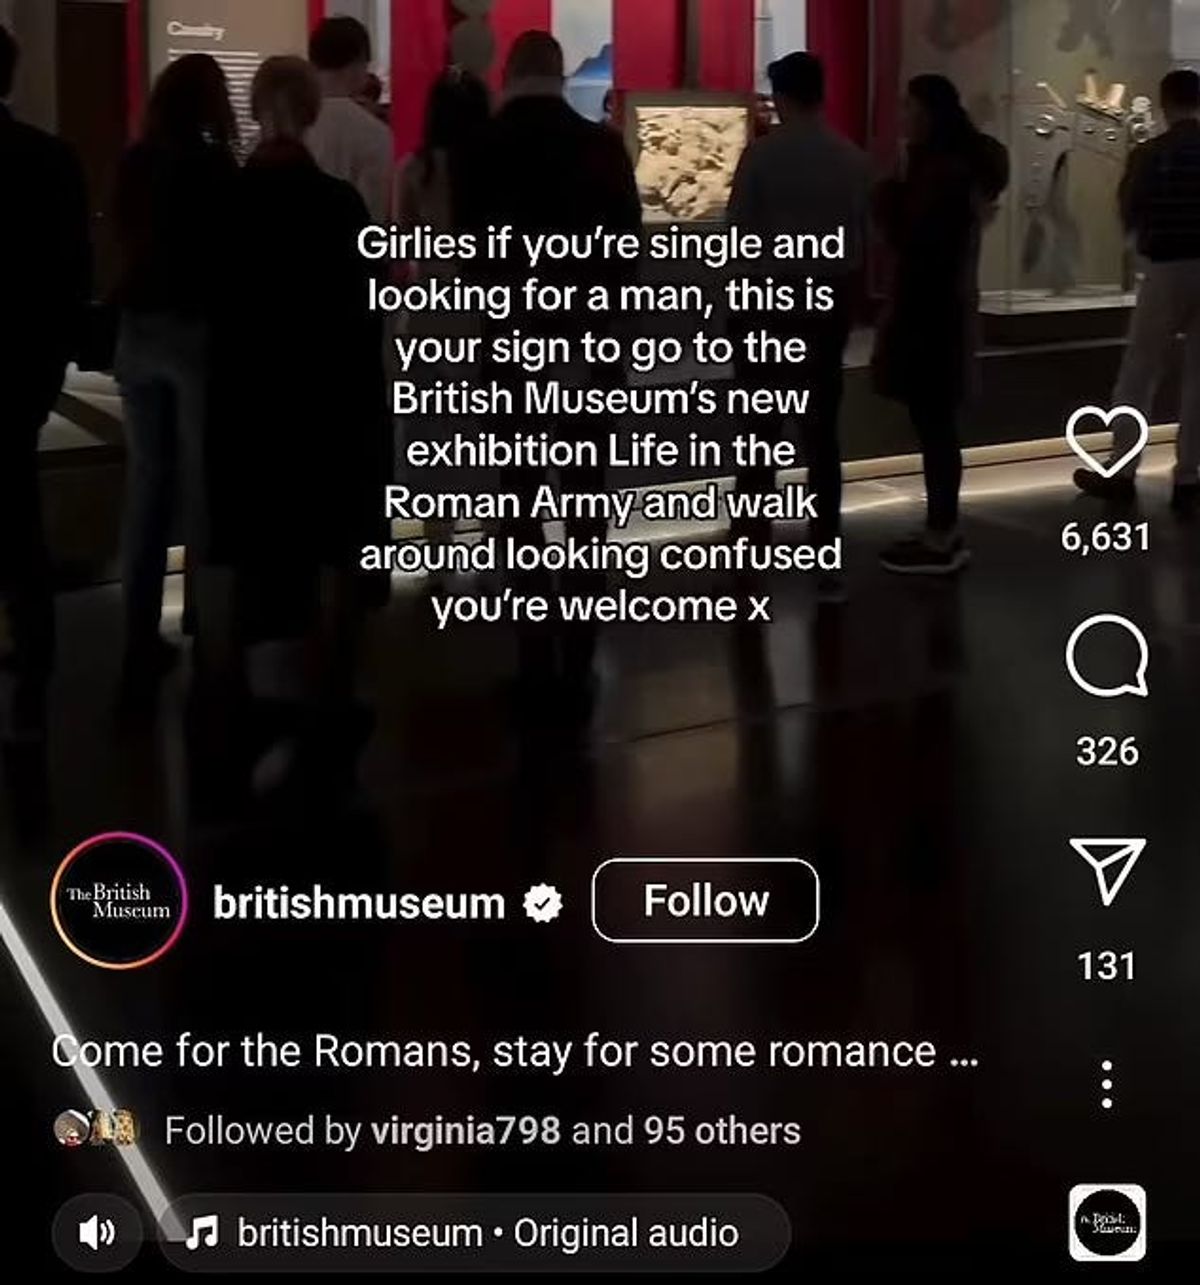 The British Museum took to the Instagram comments to defend the post

CSMFHT via Substack; British Museum via Instagram